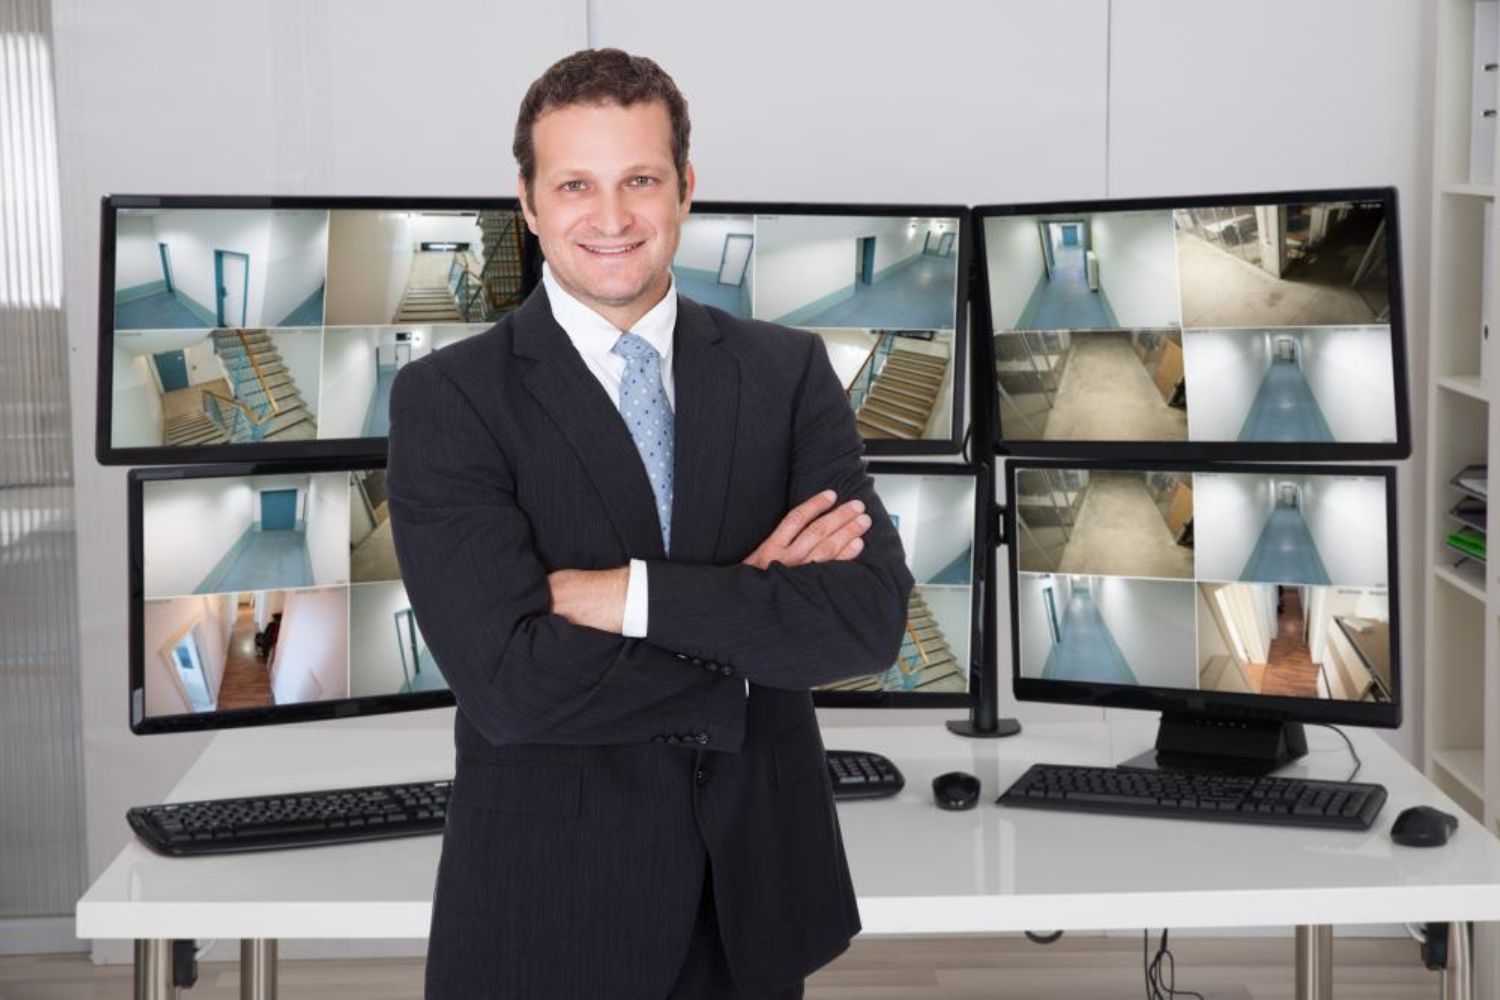 a man standing in front of the monitors photo by Andrey_Popov on shutterstock